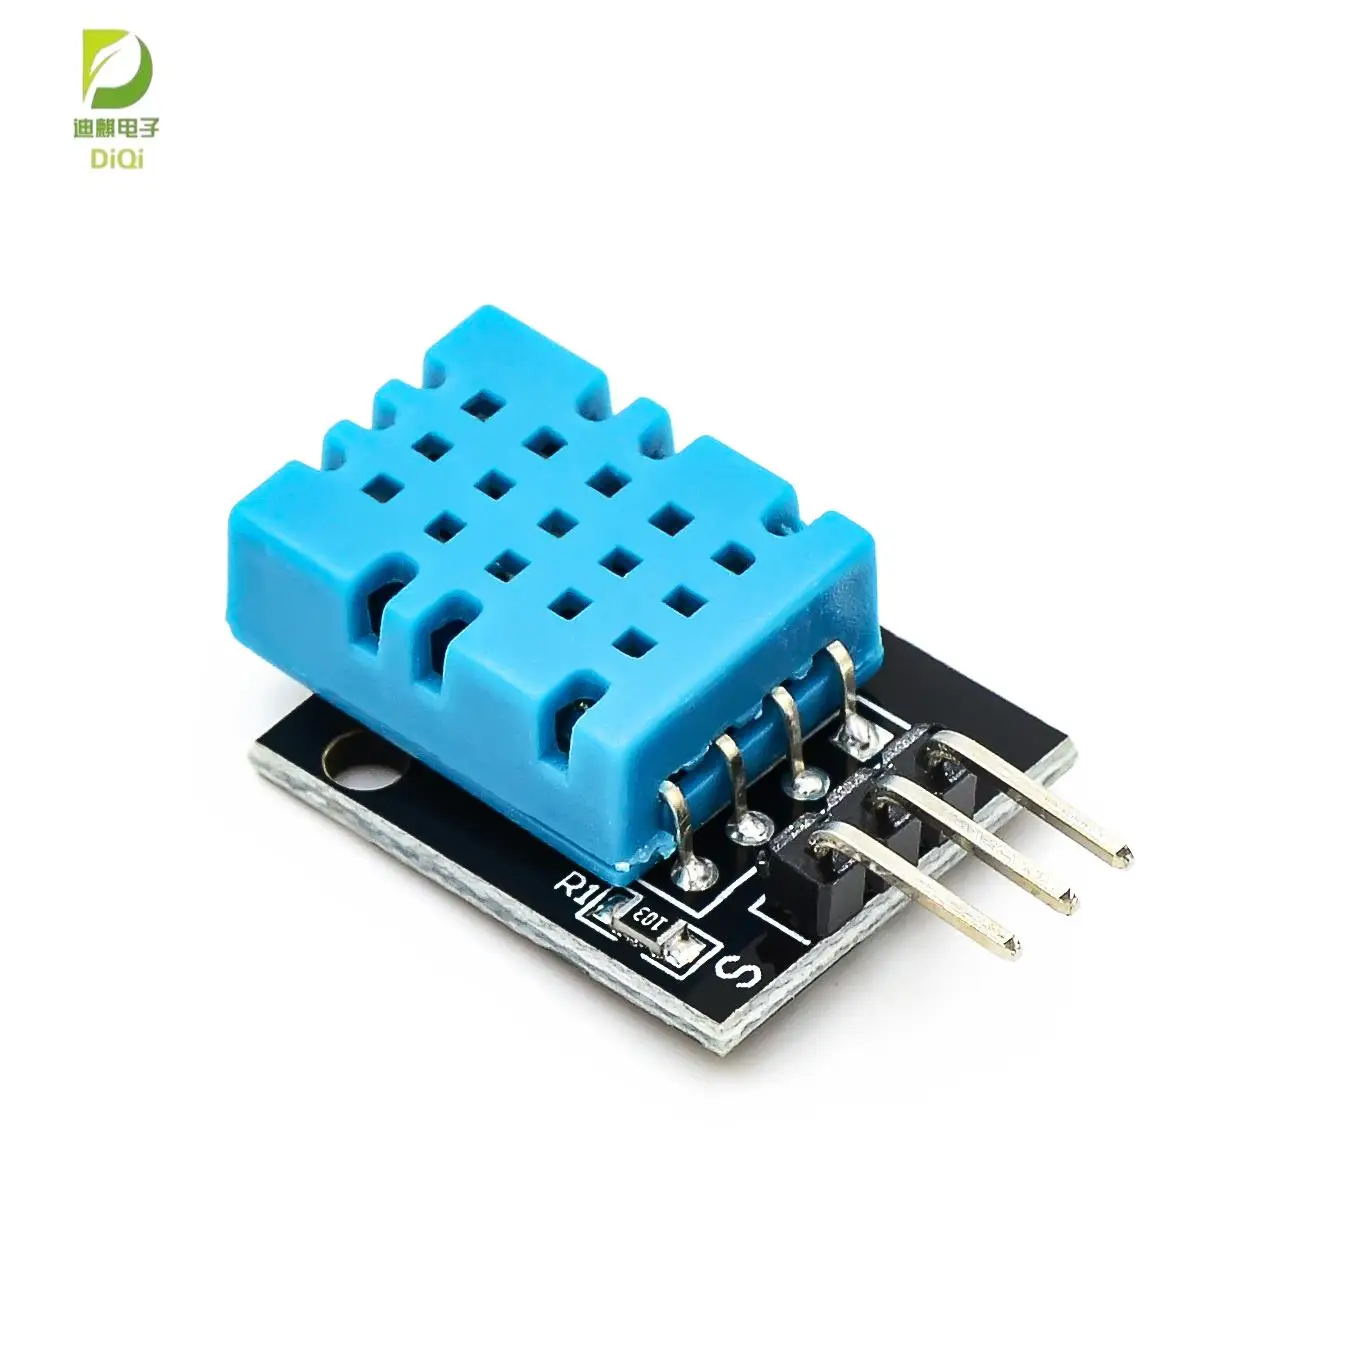 

Smart 3pin KY-015 DHT-11 DHT11 Digital Temperature And Relative Humidity Sensor Module + PCB for Arduino DIY Starter Kit